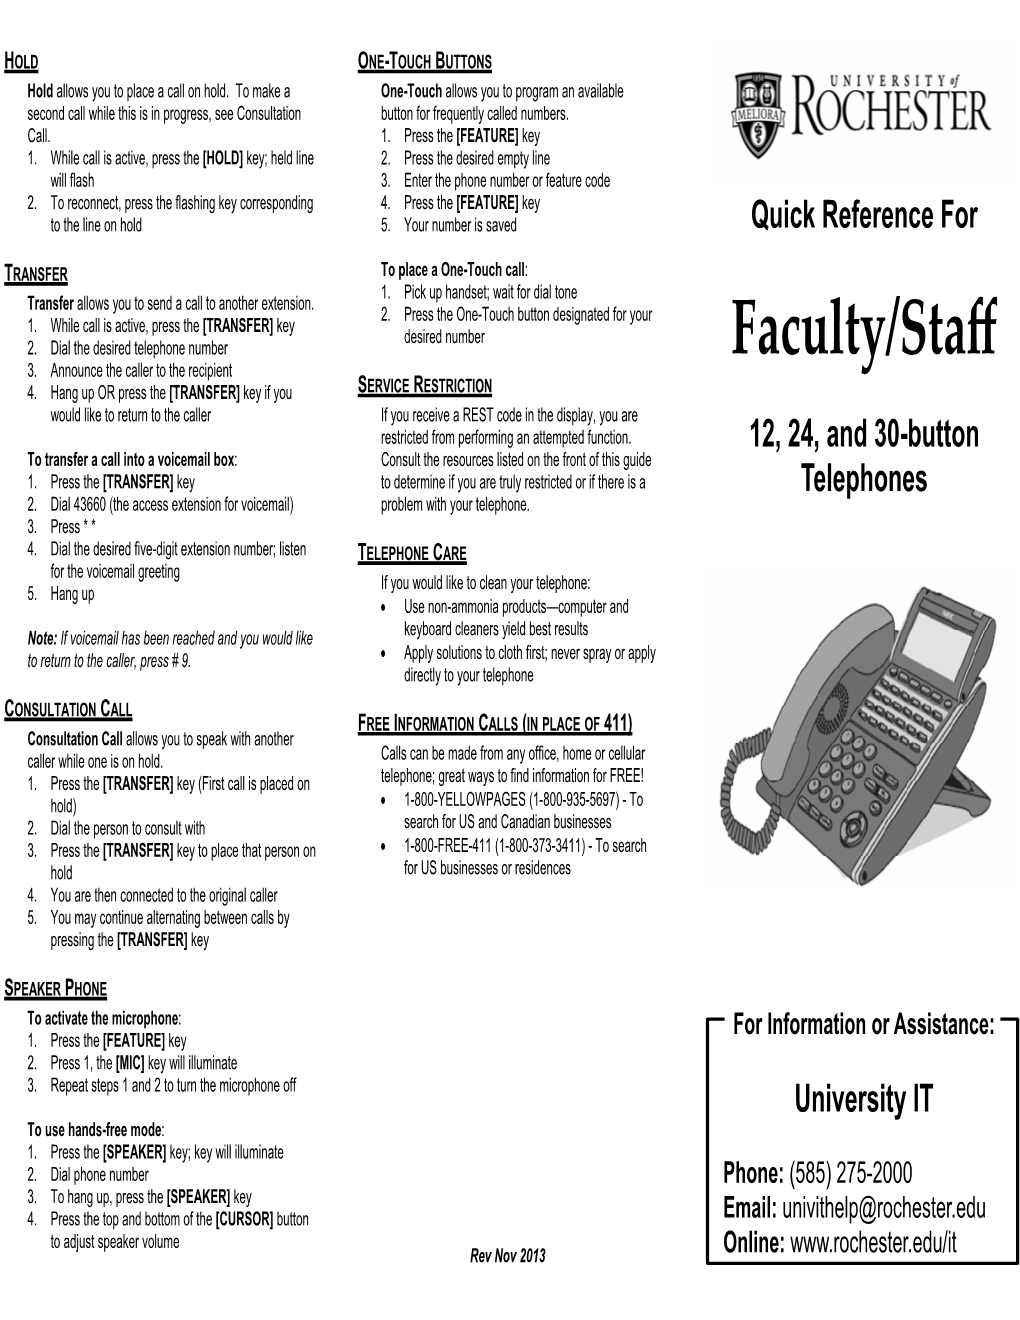 Faculty/Staff